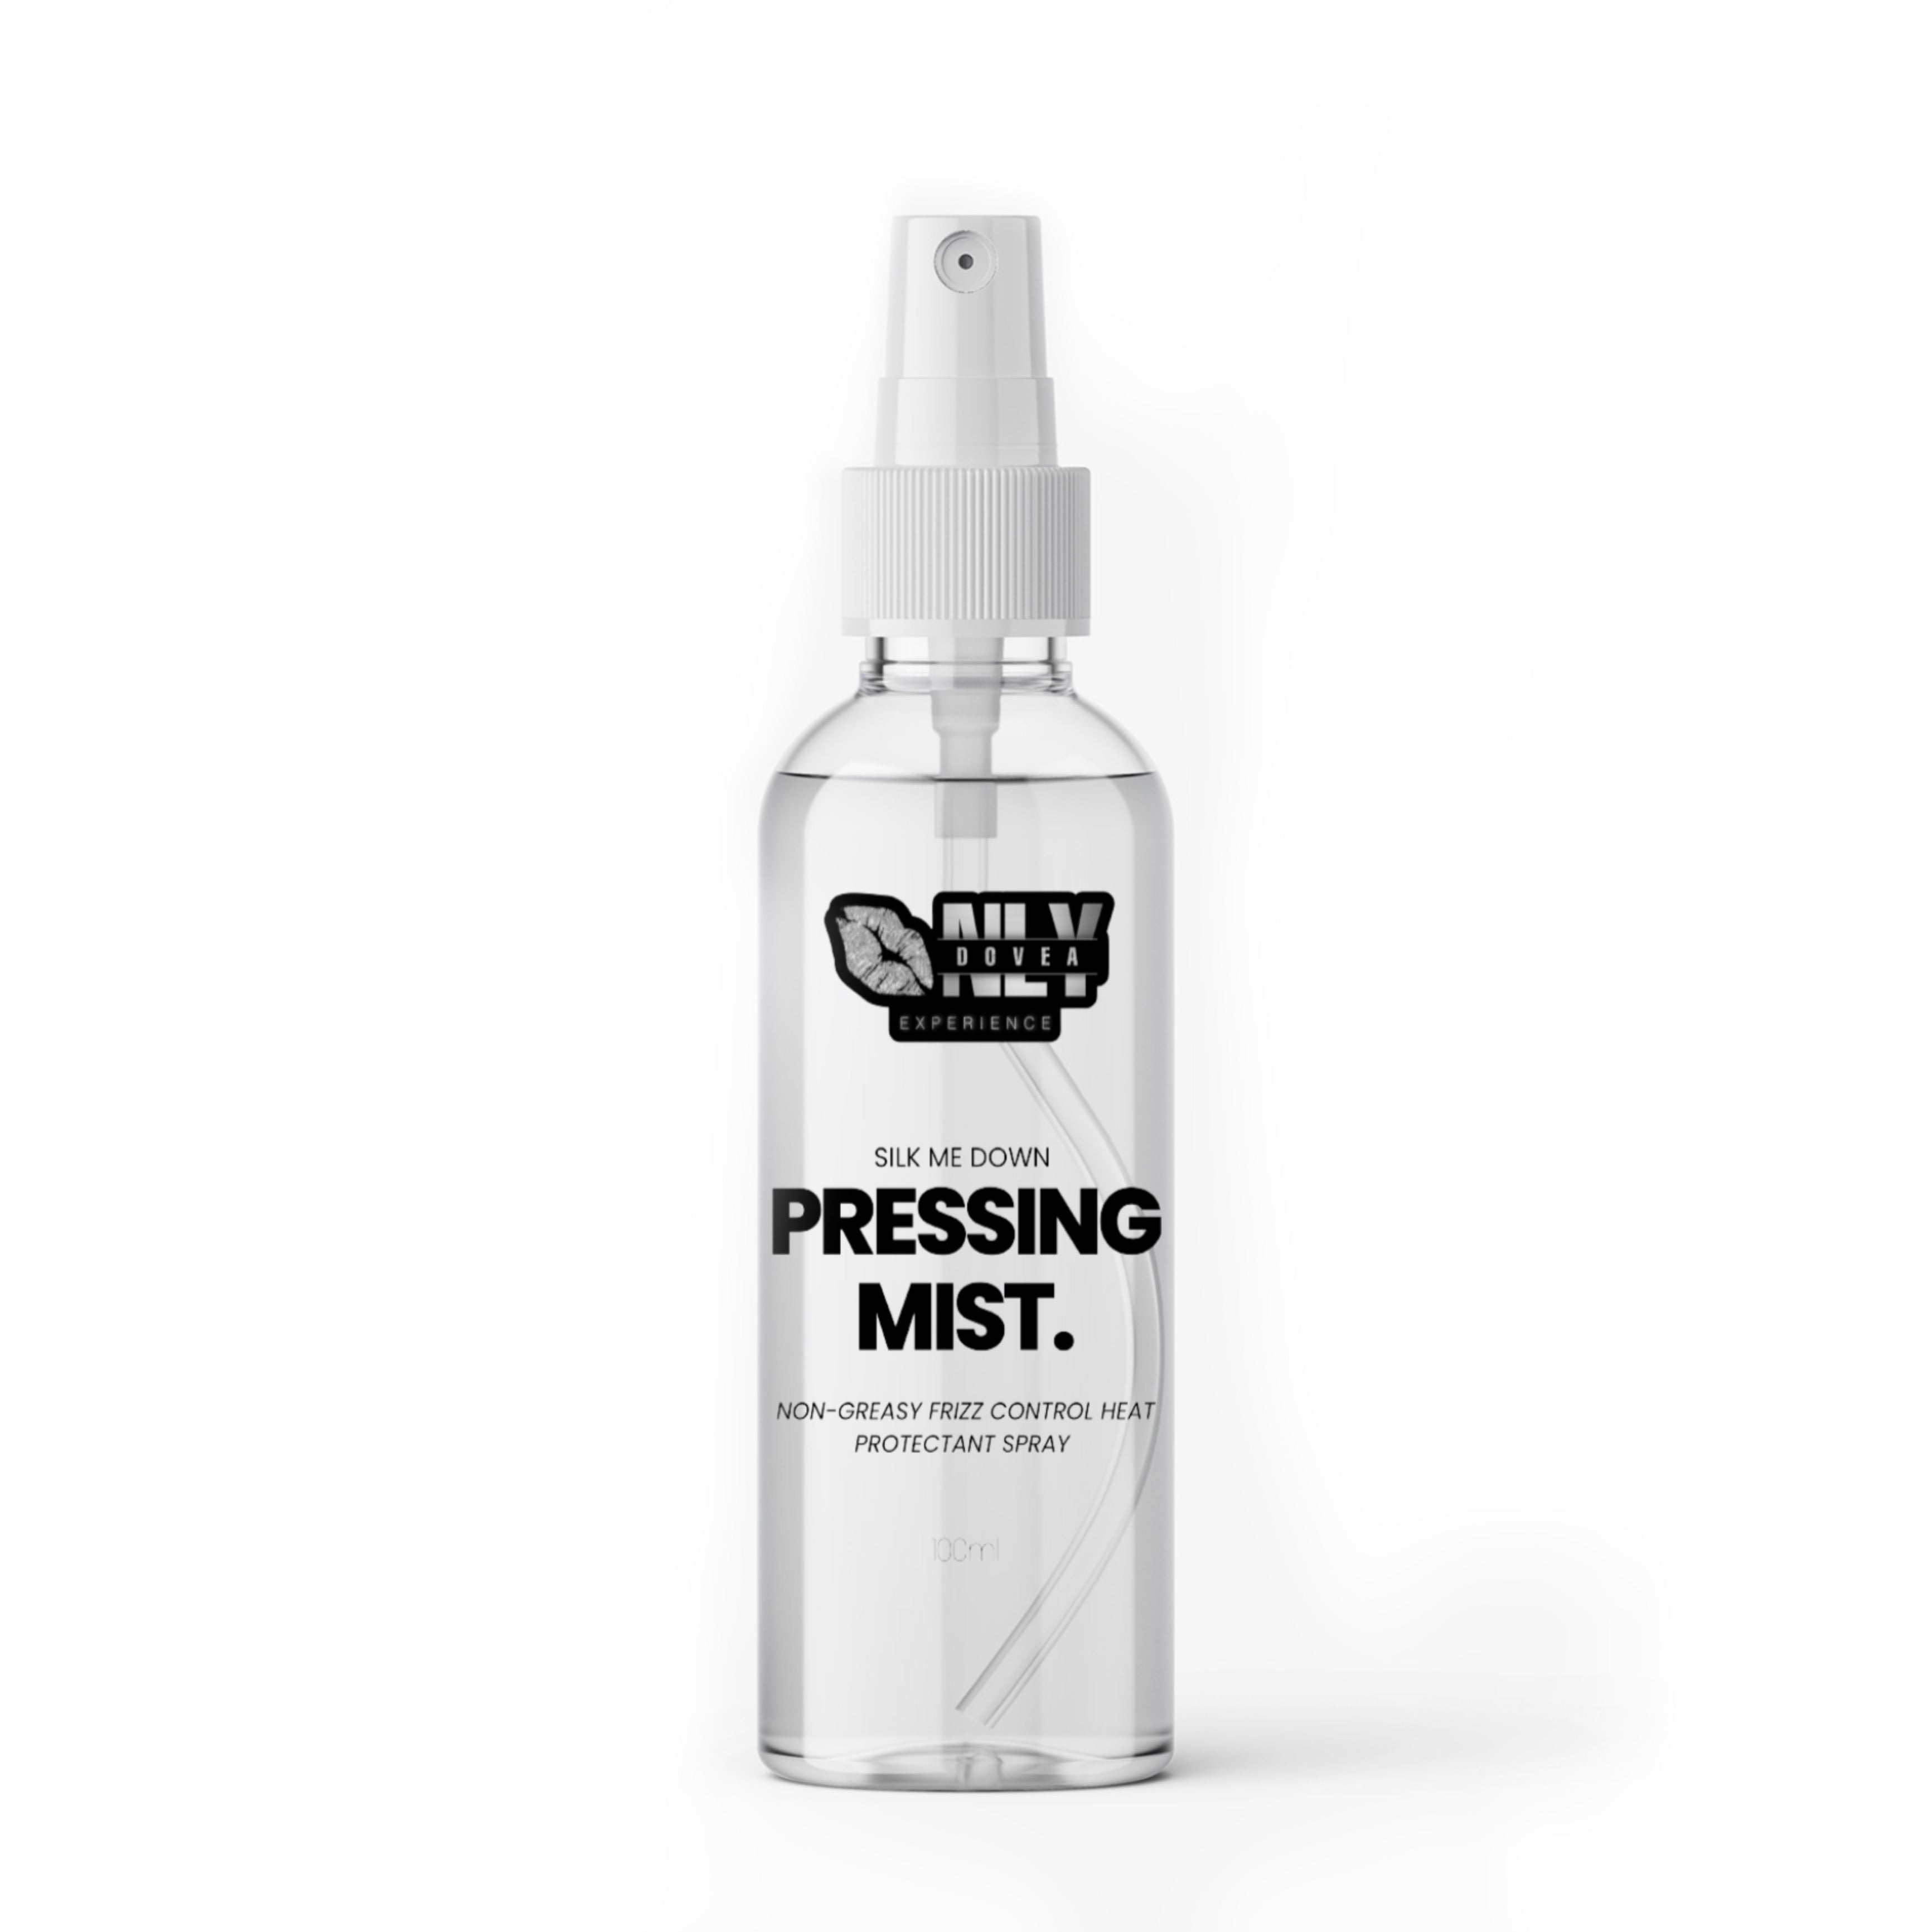 PRESSING MIST - Only Dovea Collection